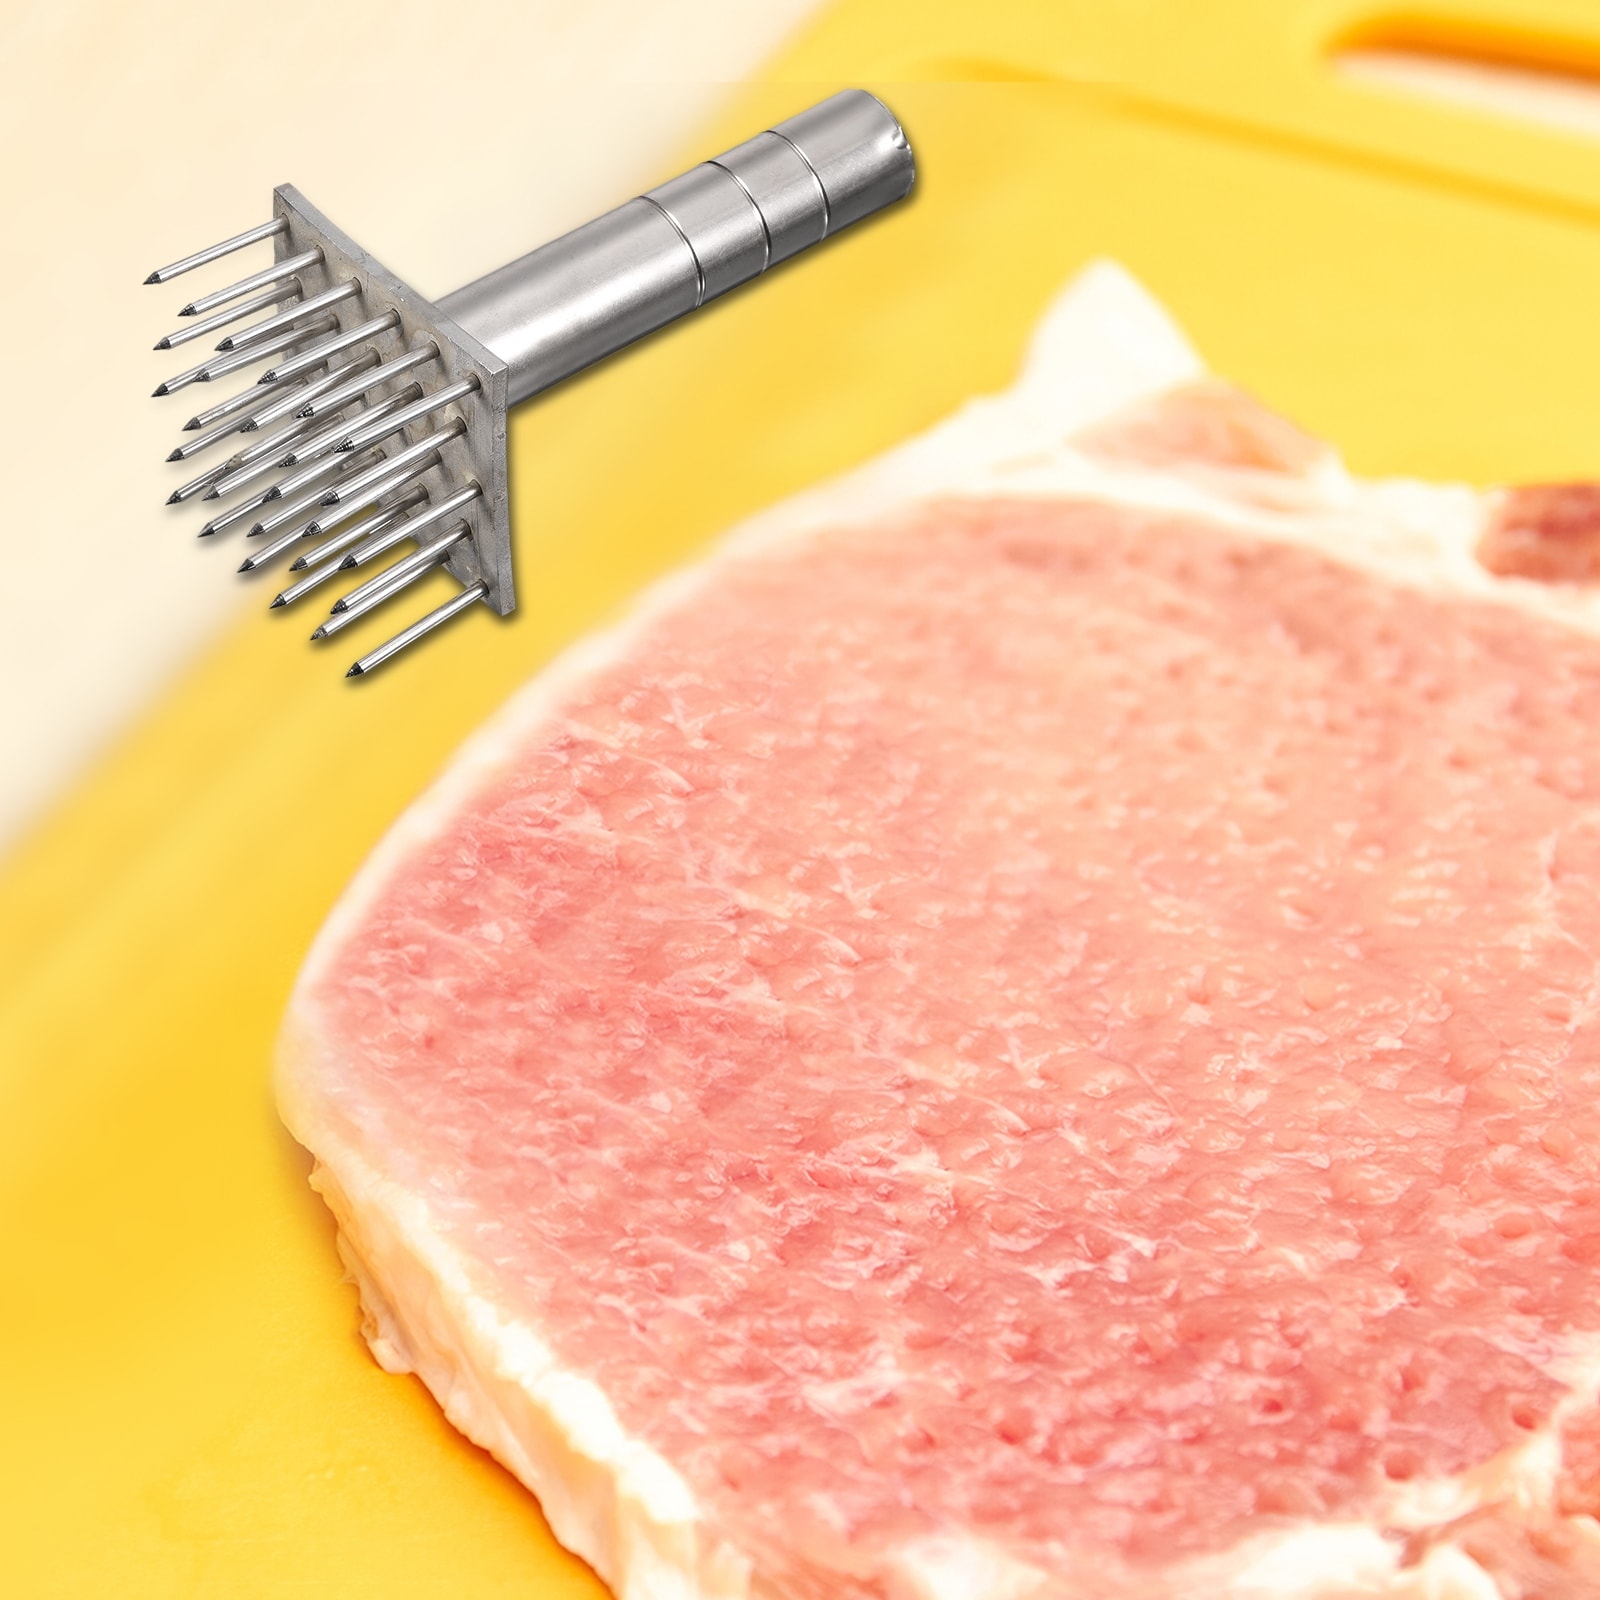 https://ak1.ostkcdn.com/images/products/is/images/direct/0001a35edd64ece0721f41288cde31699e70217a/Stainless-Steel-Meat-Tenderizer%2C-Meat-Mallet-Needle-Nails%2C-Silver-Tone.jpg